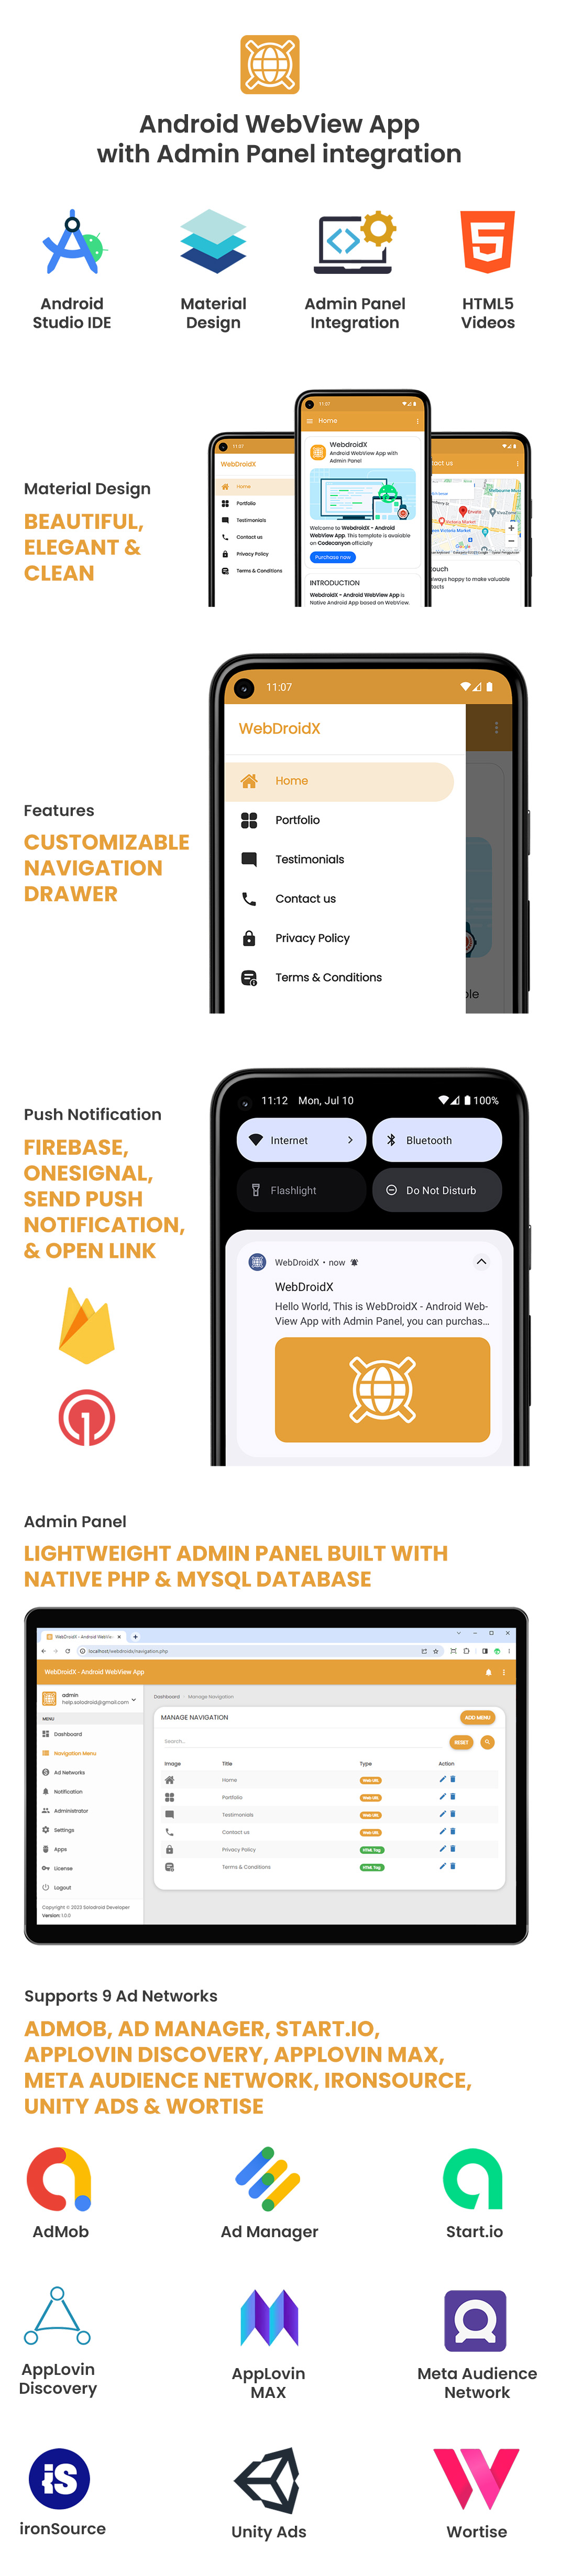 WebDroidX - Android WebView App with Admin Panel - 3